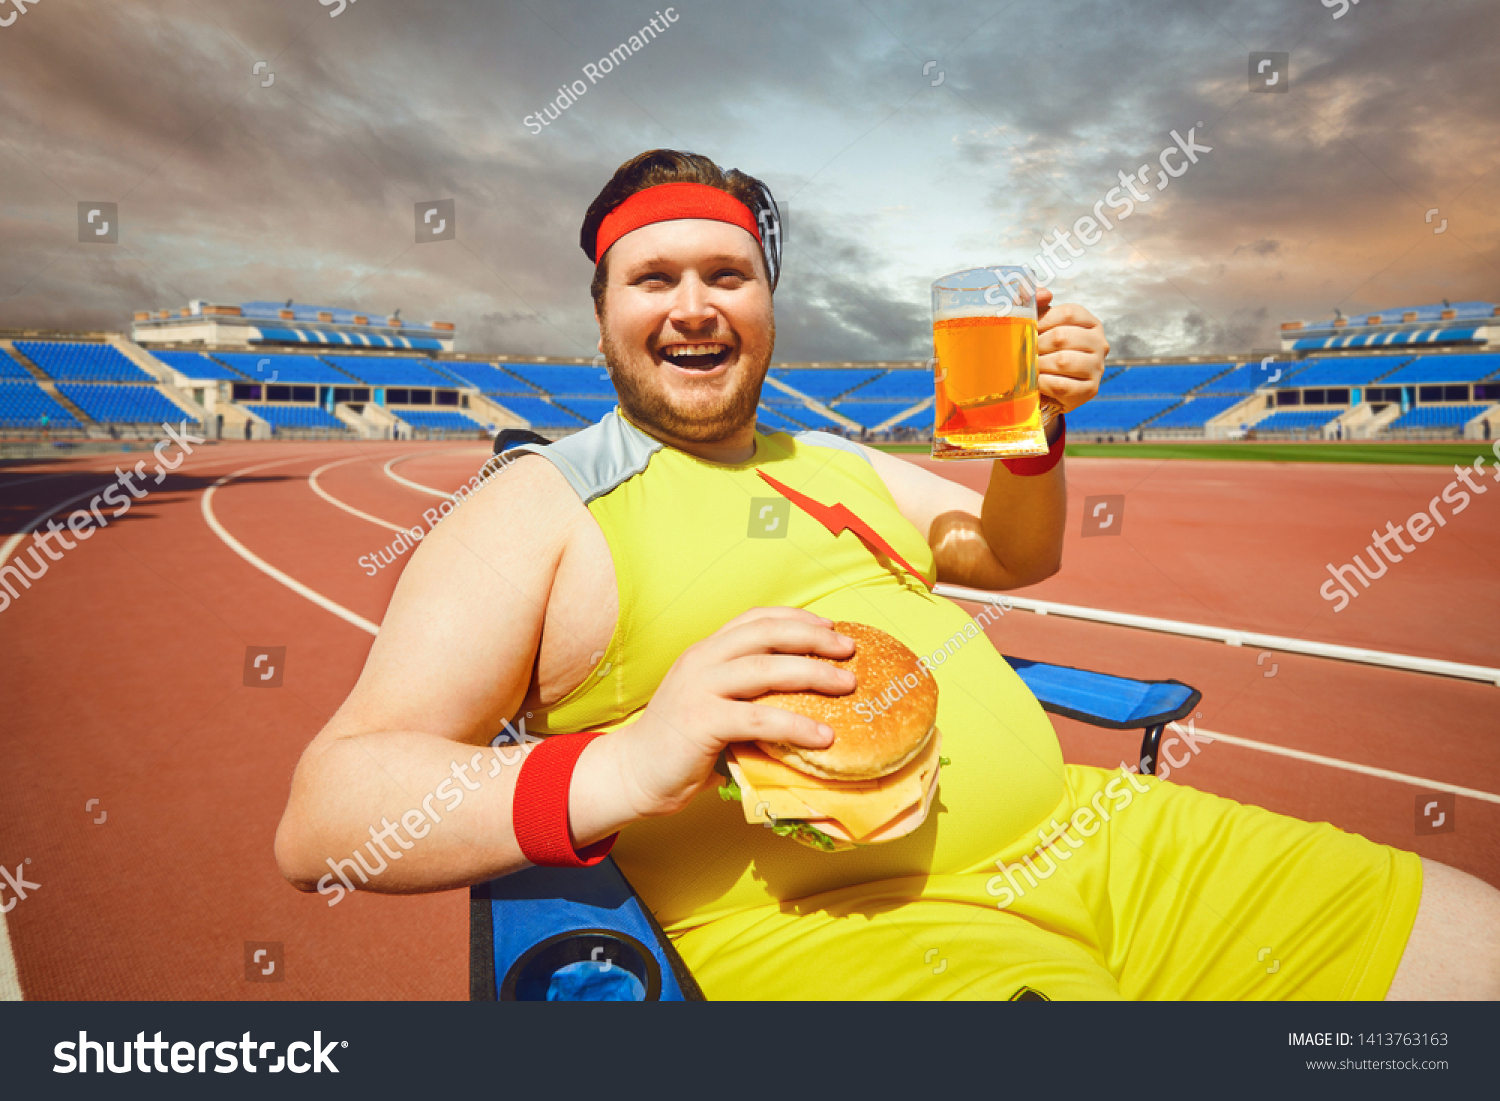 stock-photo-fat-man-eating-a-burger-and-beer-in-training-at-the-stadium-1413763163.jpg